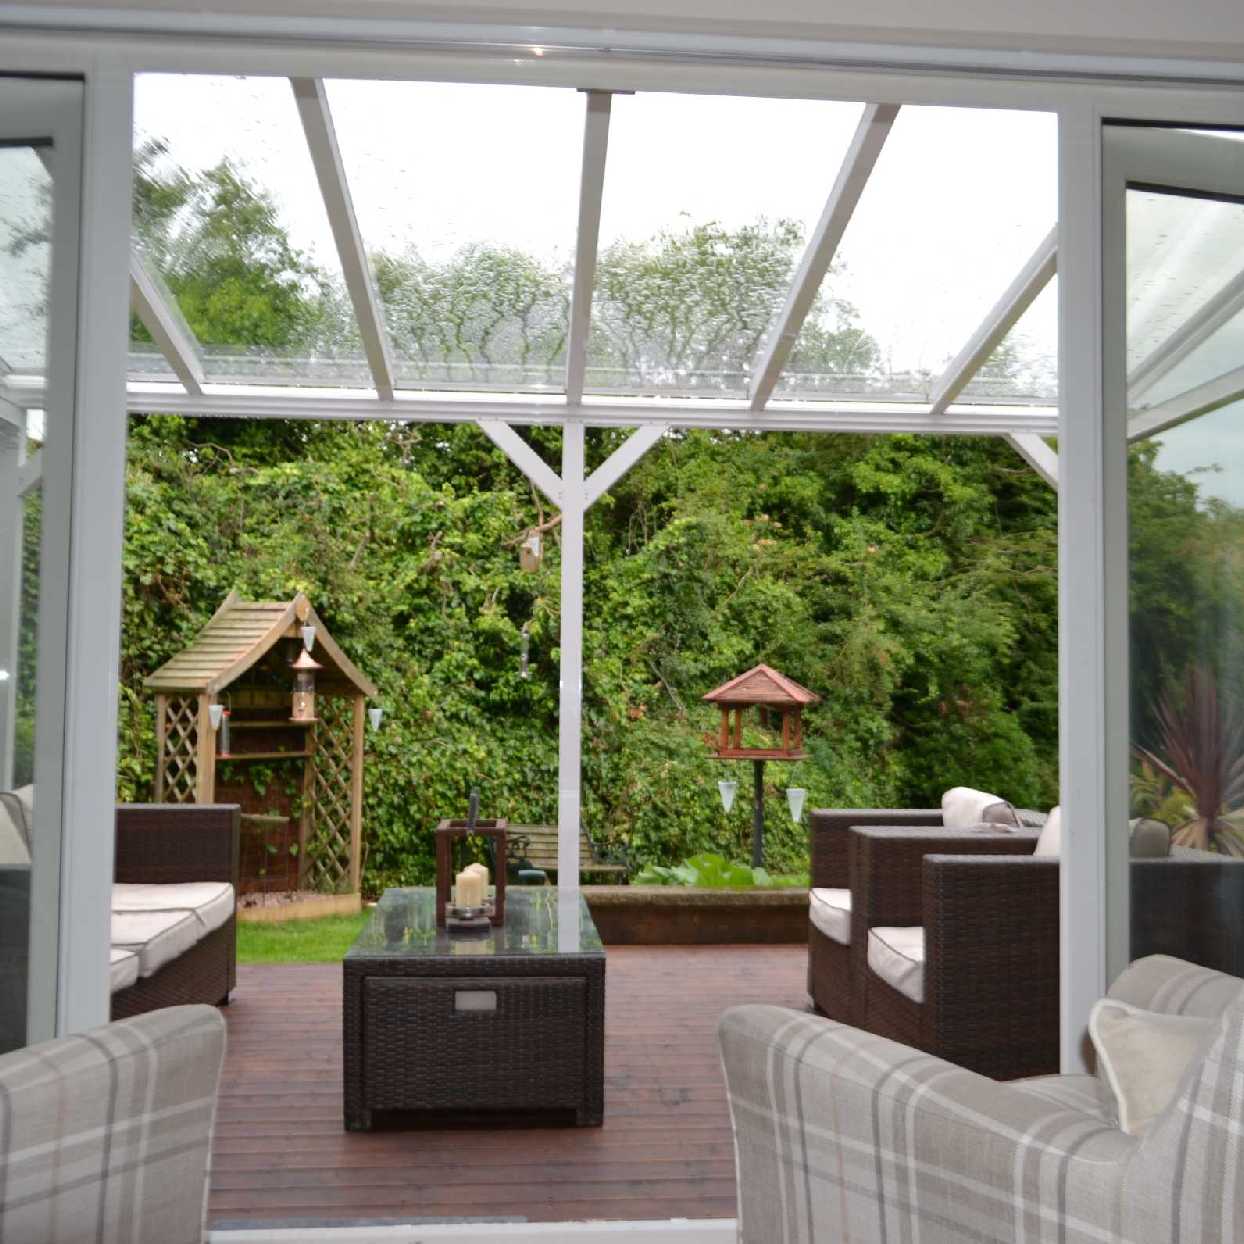 Great selection of Omega Smart Lean-To Canopy, White UNGLAZED for 6mm Glazing - 4.2m (W) x 2.0m (P), (3) Supporting Posts